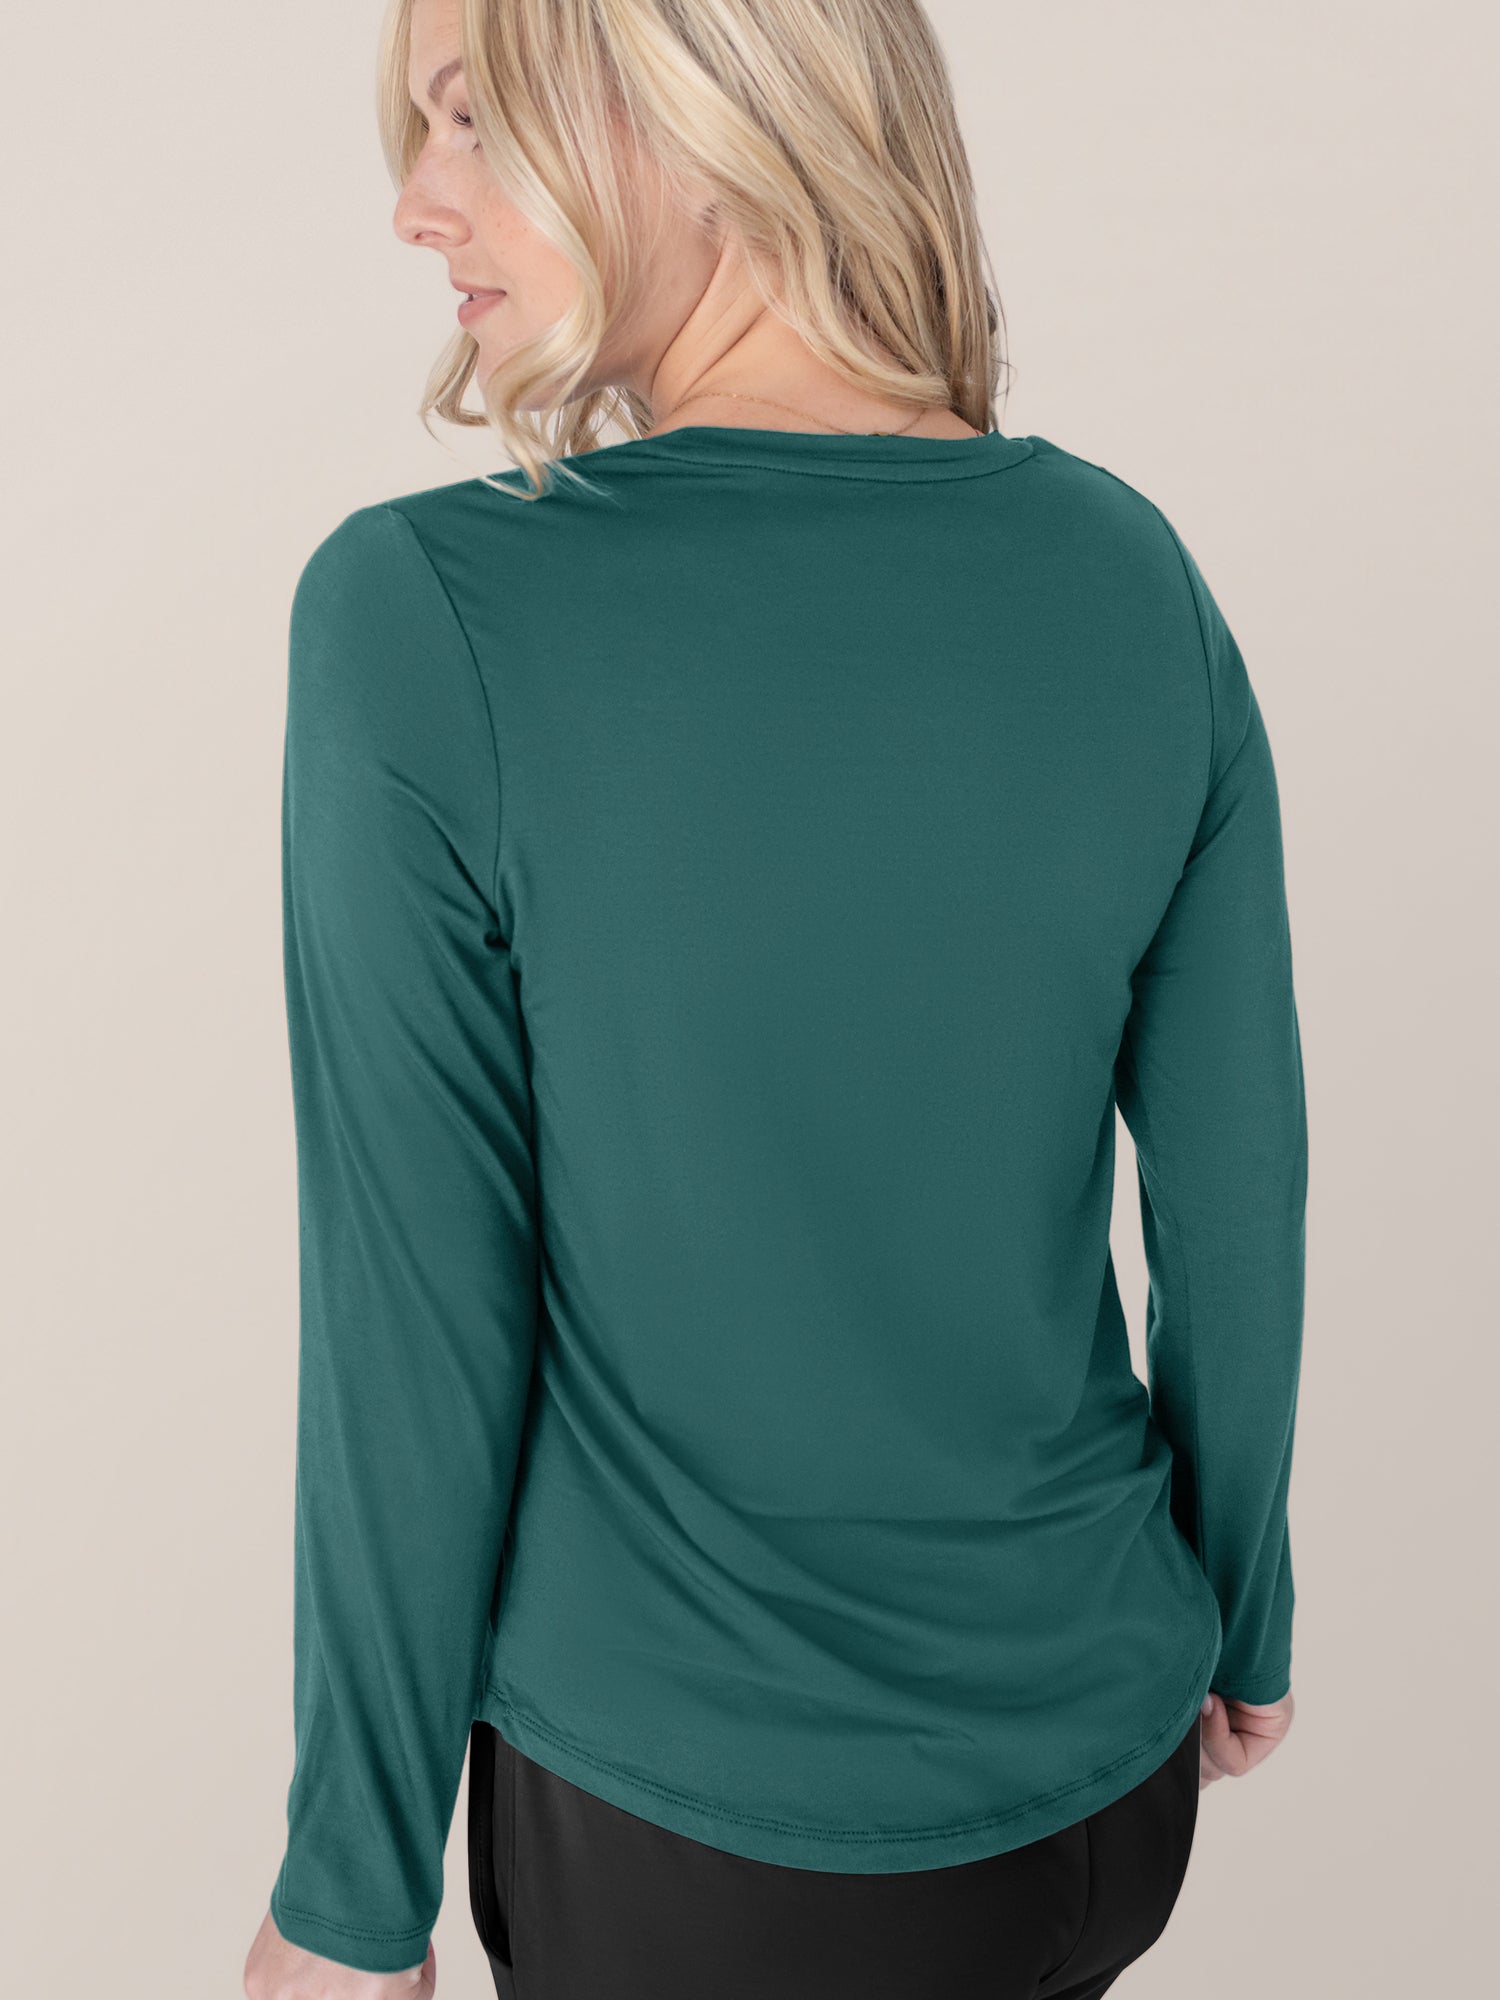 Back view of a model wearing the Bamboo Maternity & Nursing Long Sleeve T-shirt in Evergreen